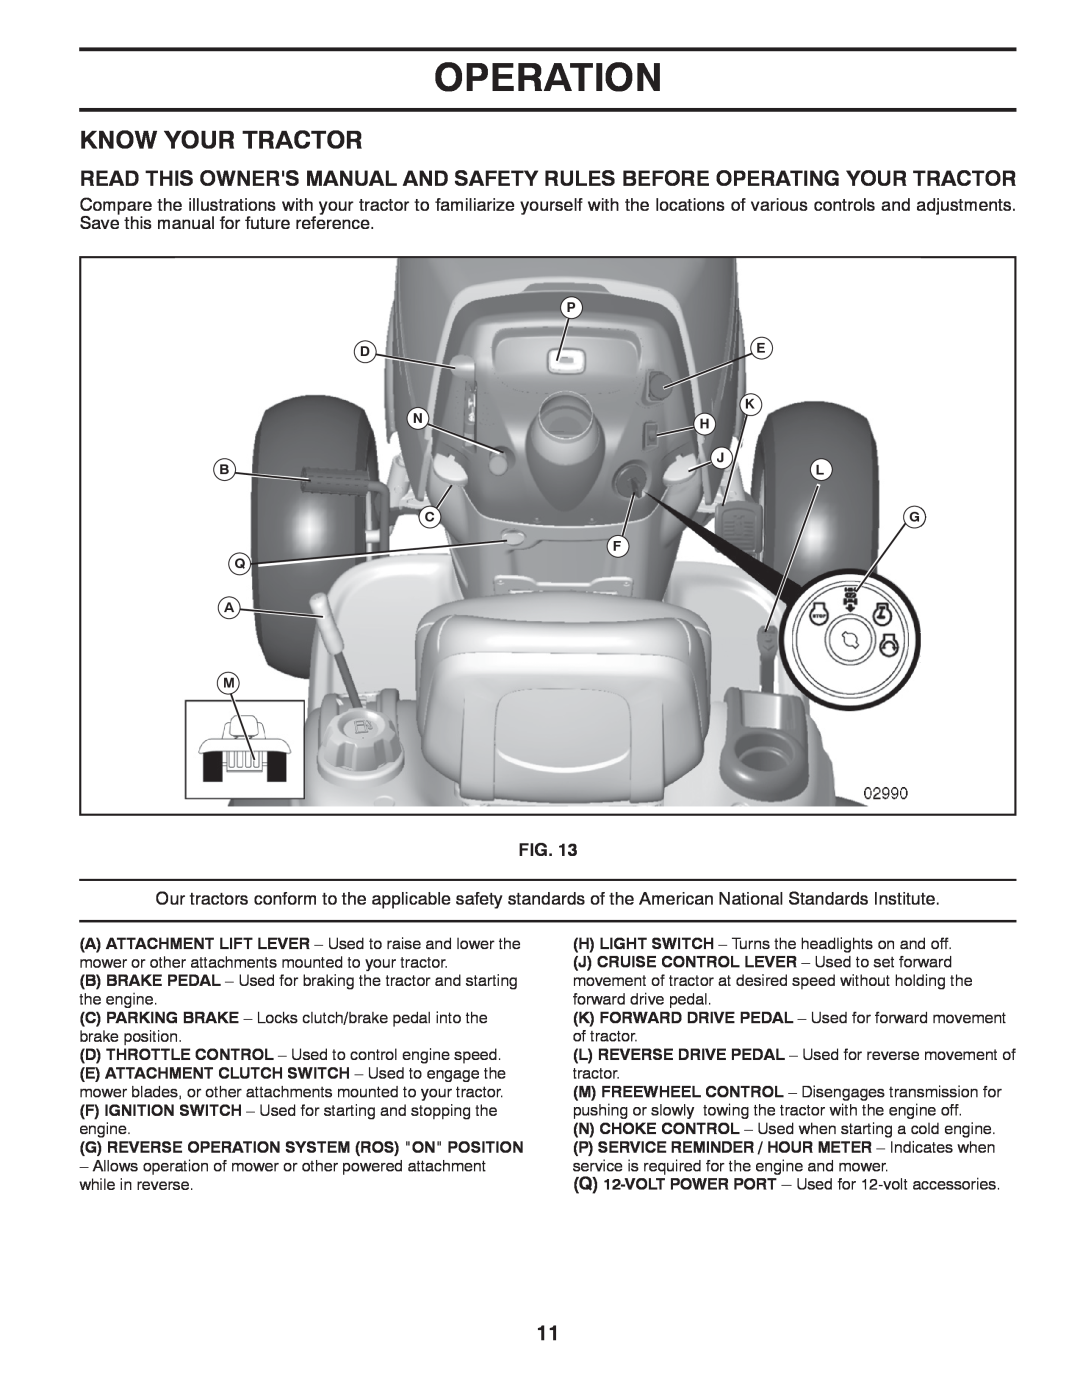 Poulan PBGT26H54 manual Know Your Tractor, G Reverse Operation System Ros On Position 